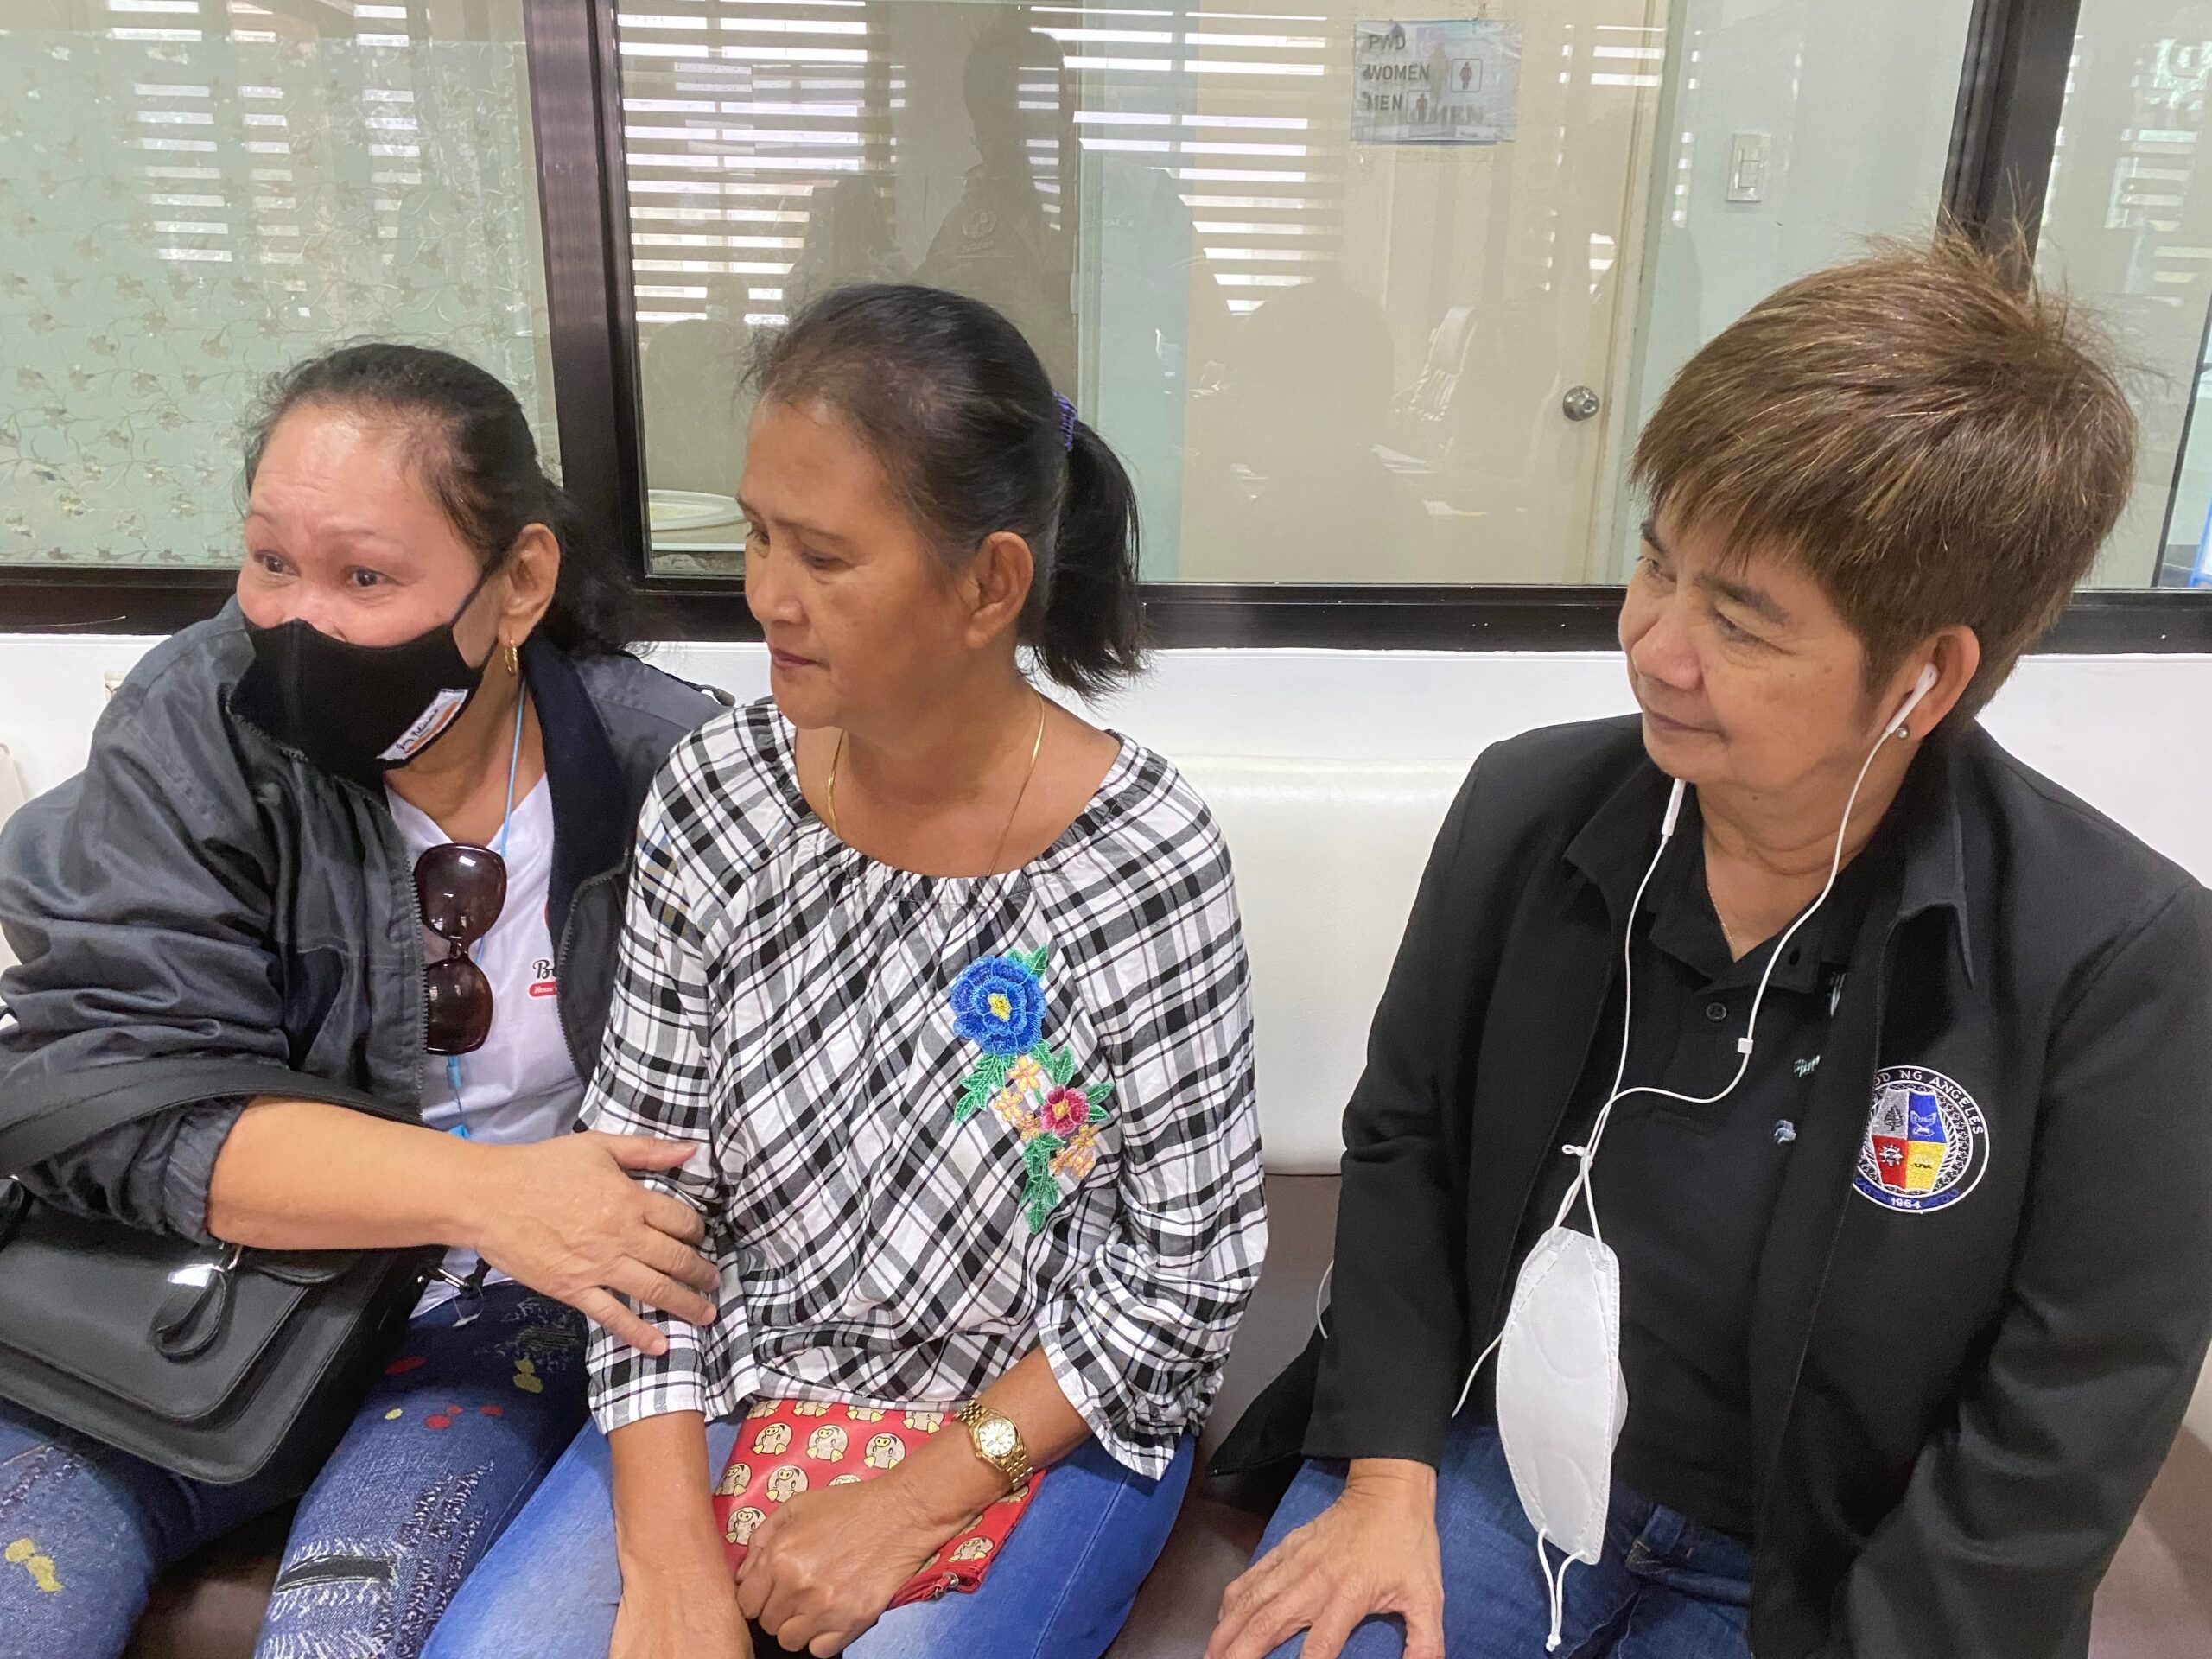 Angeles City reunites lost elderly woman with family in Aklan